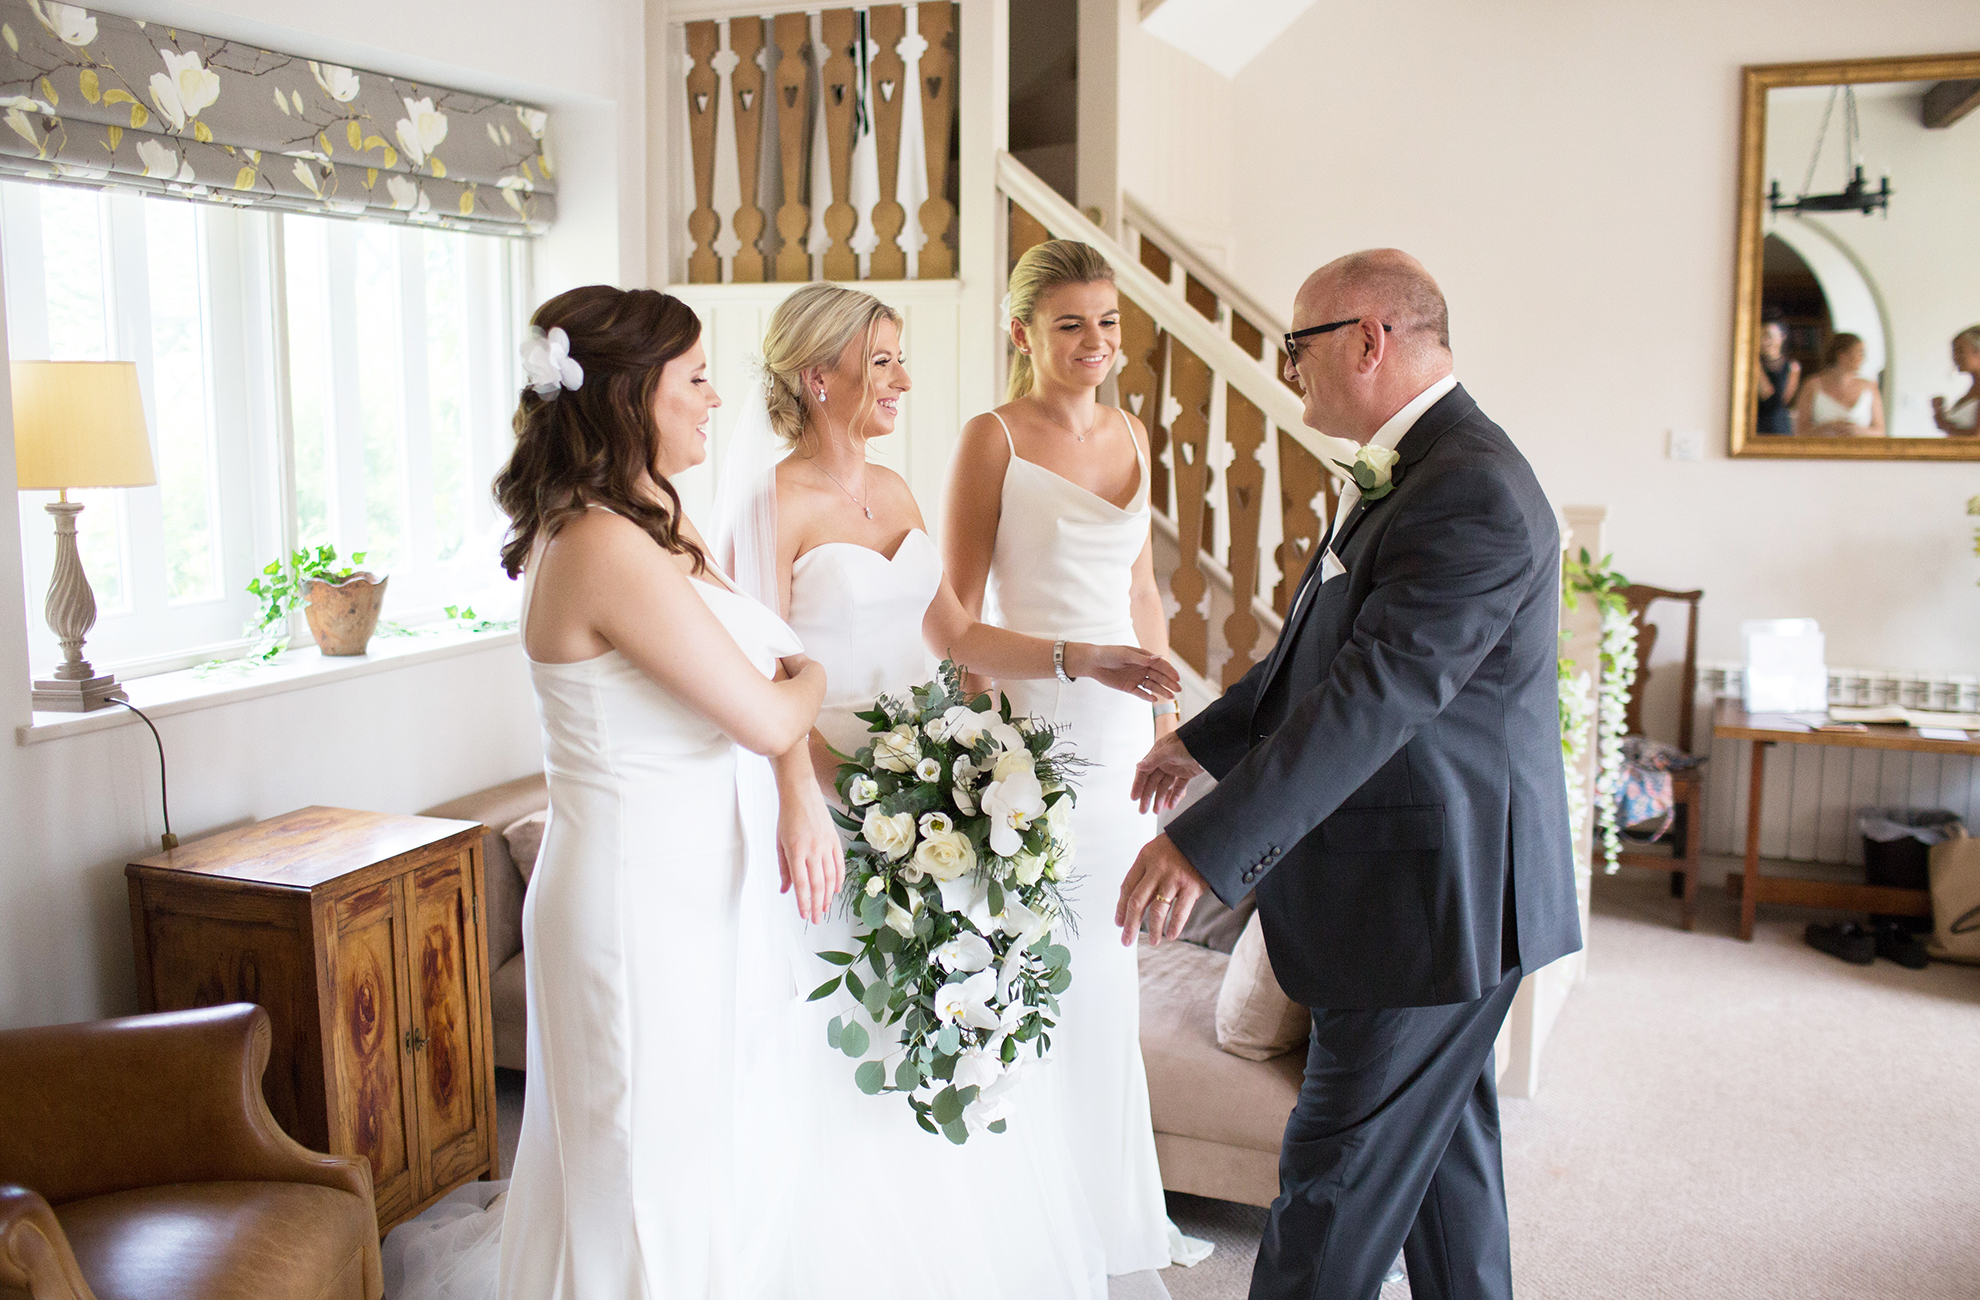 The father of the bride see’s his daughter for the first time on her wedding day at Combermere Abbey in Cheshire